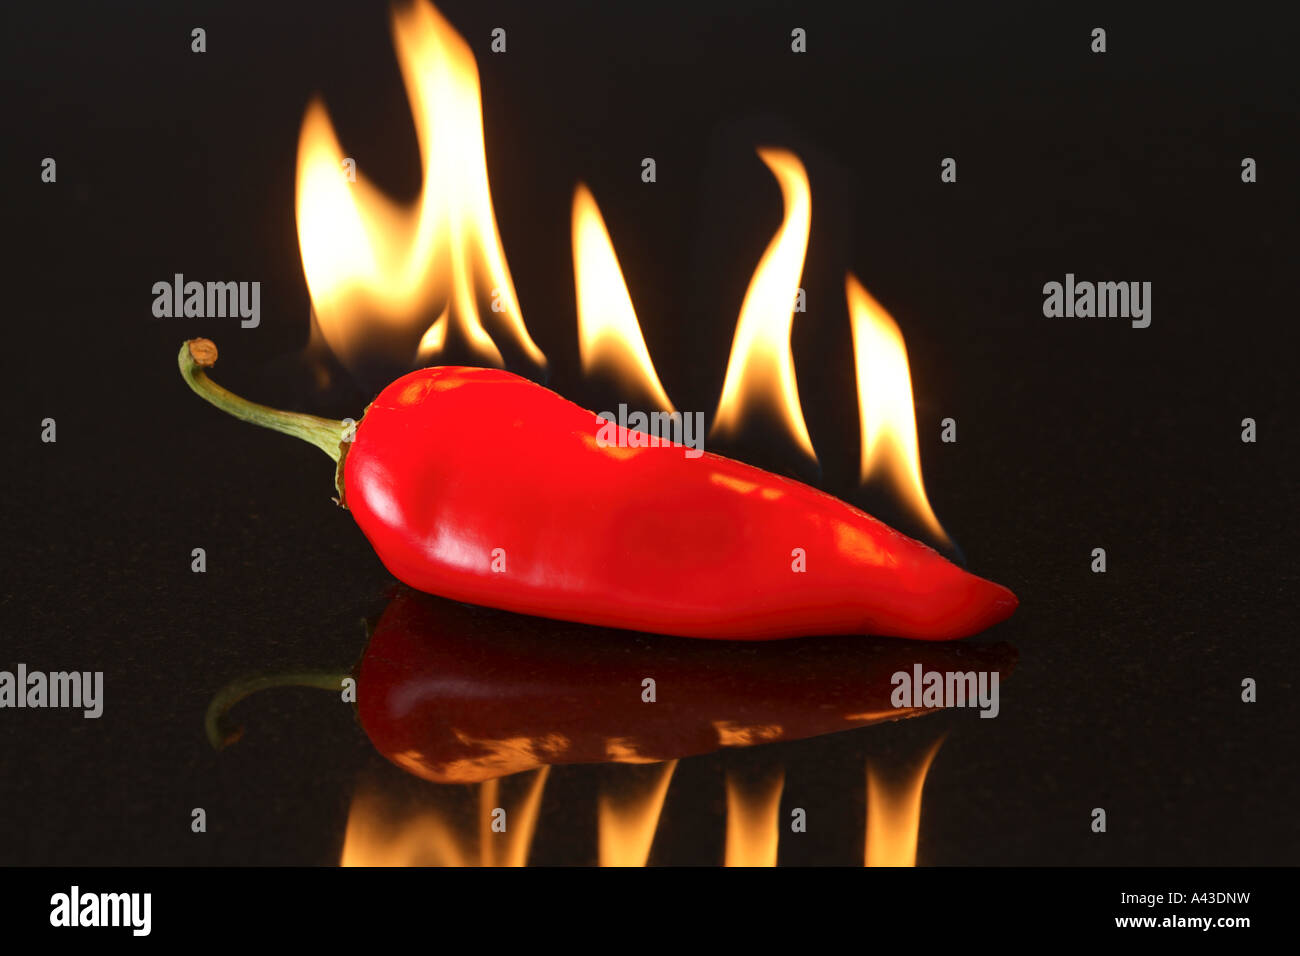 Hot red pepper with flames Stock Photo